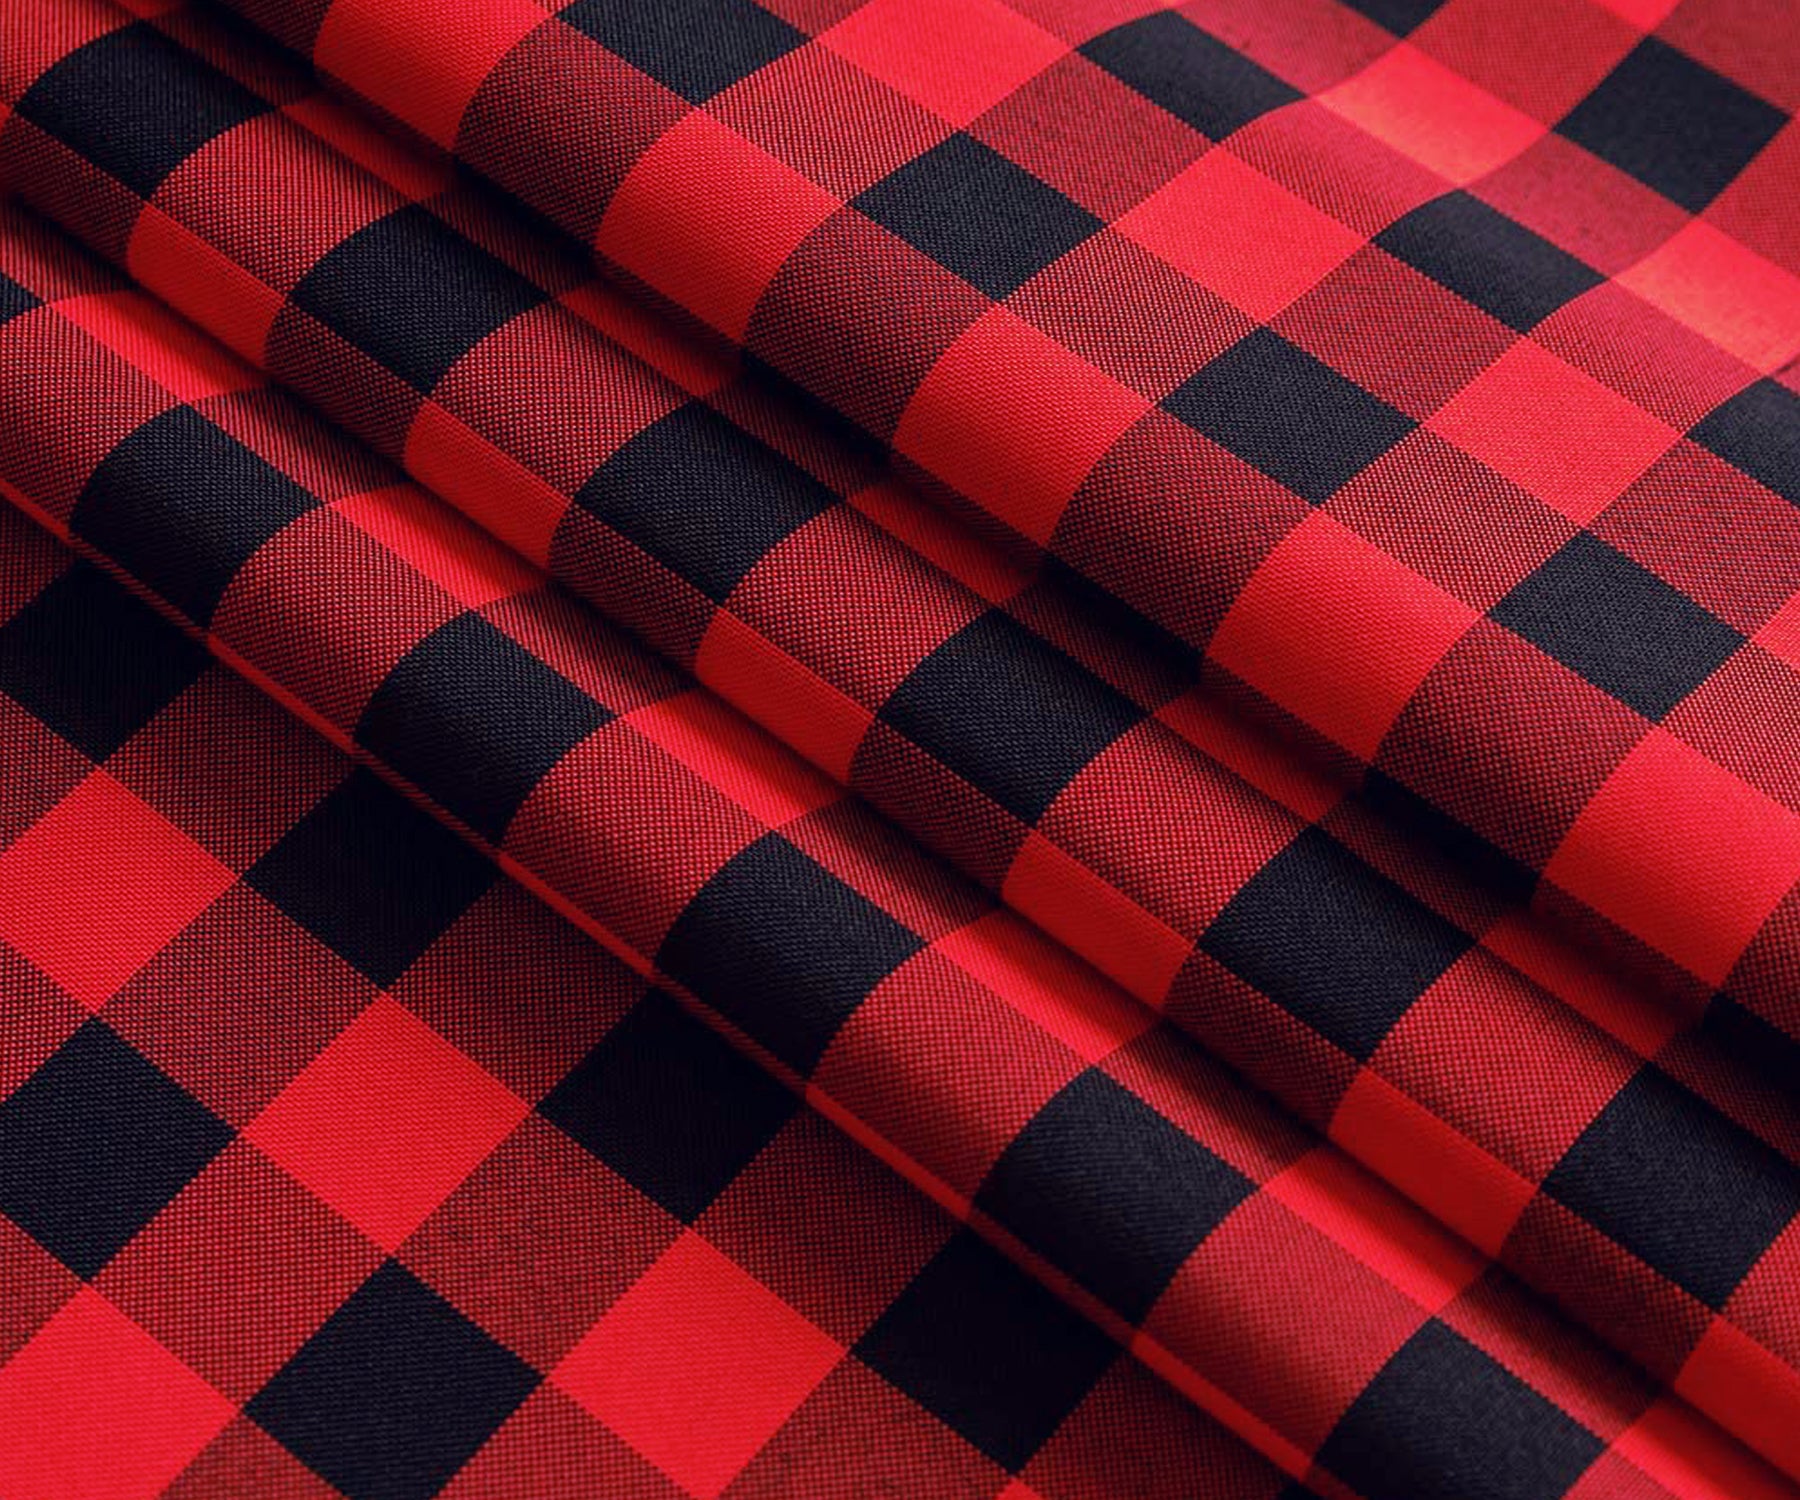 Red and black tablecloth is machine washable, reusable, and resistant to dirt. tablecloths cotton rectangle you can use it without any hassles